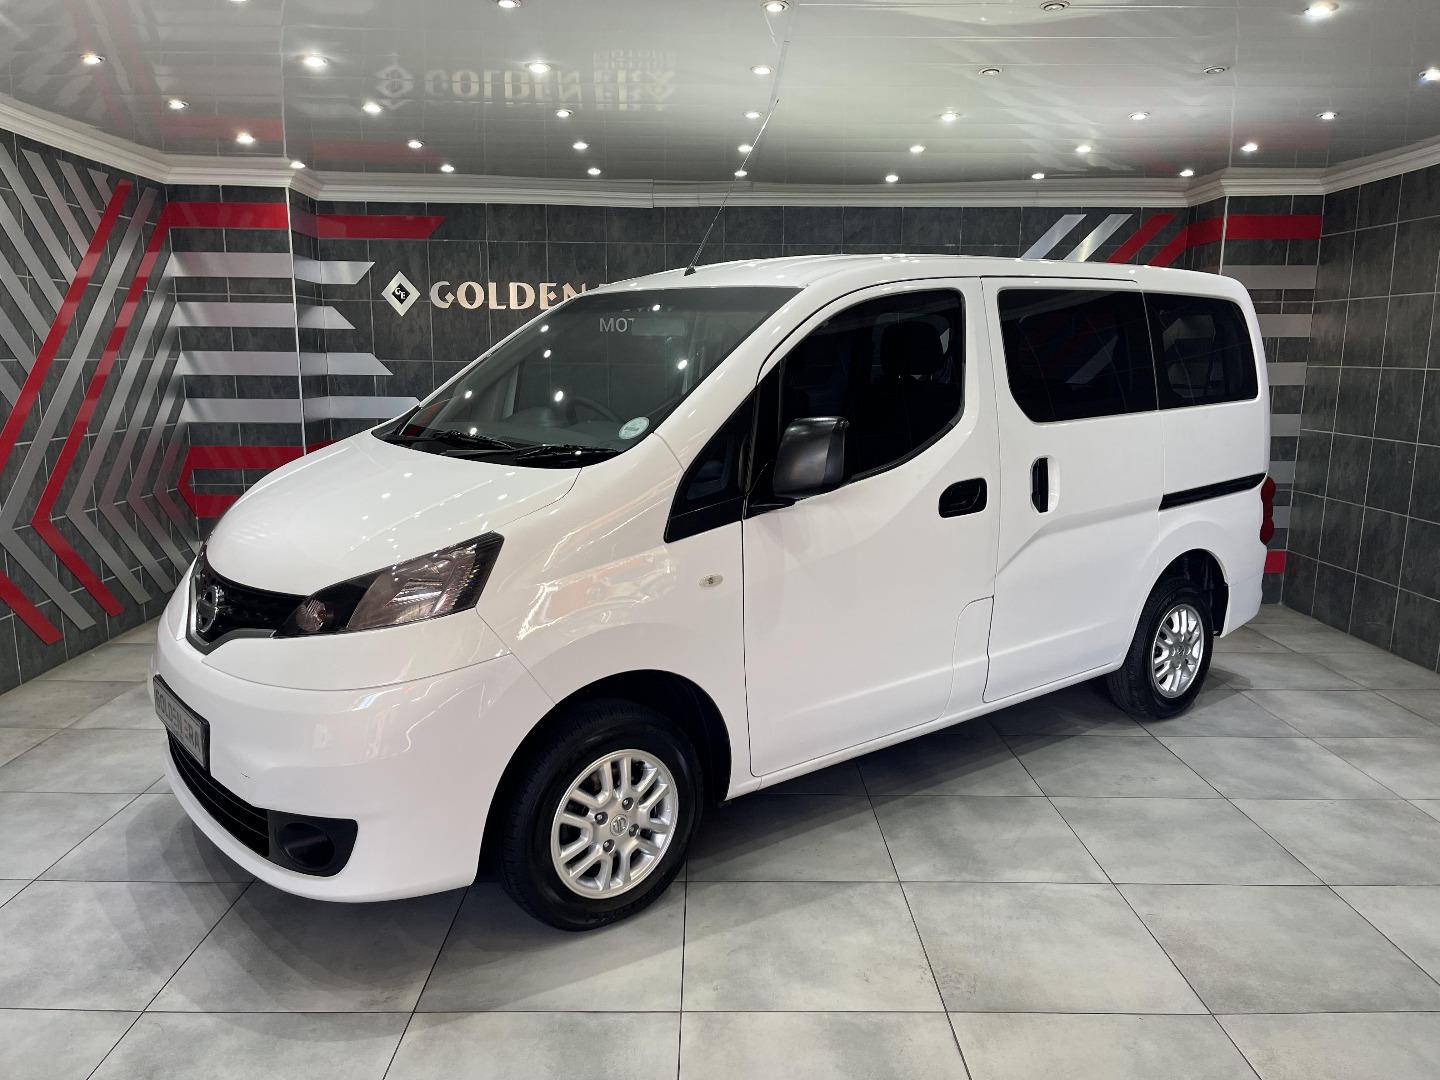 2016 Nissan NV200 Combi 1.5dCi Visia For Sale